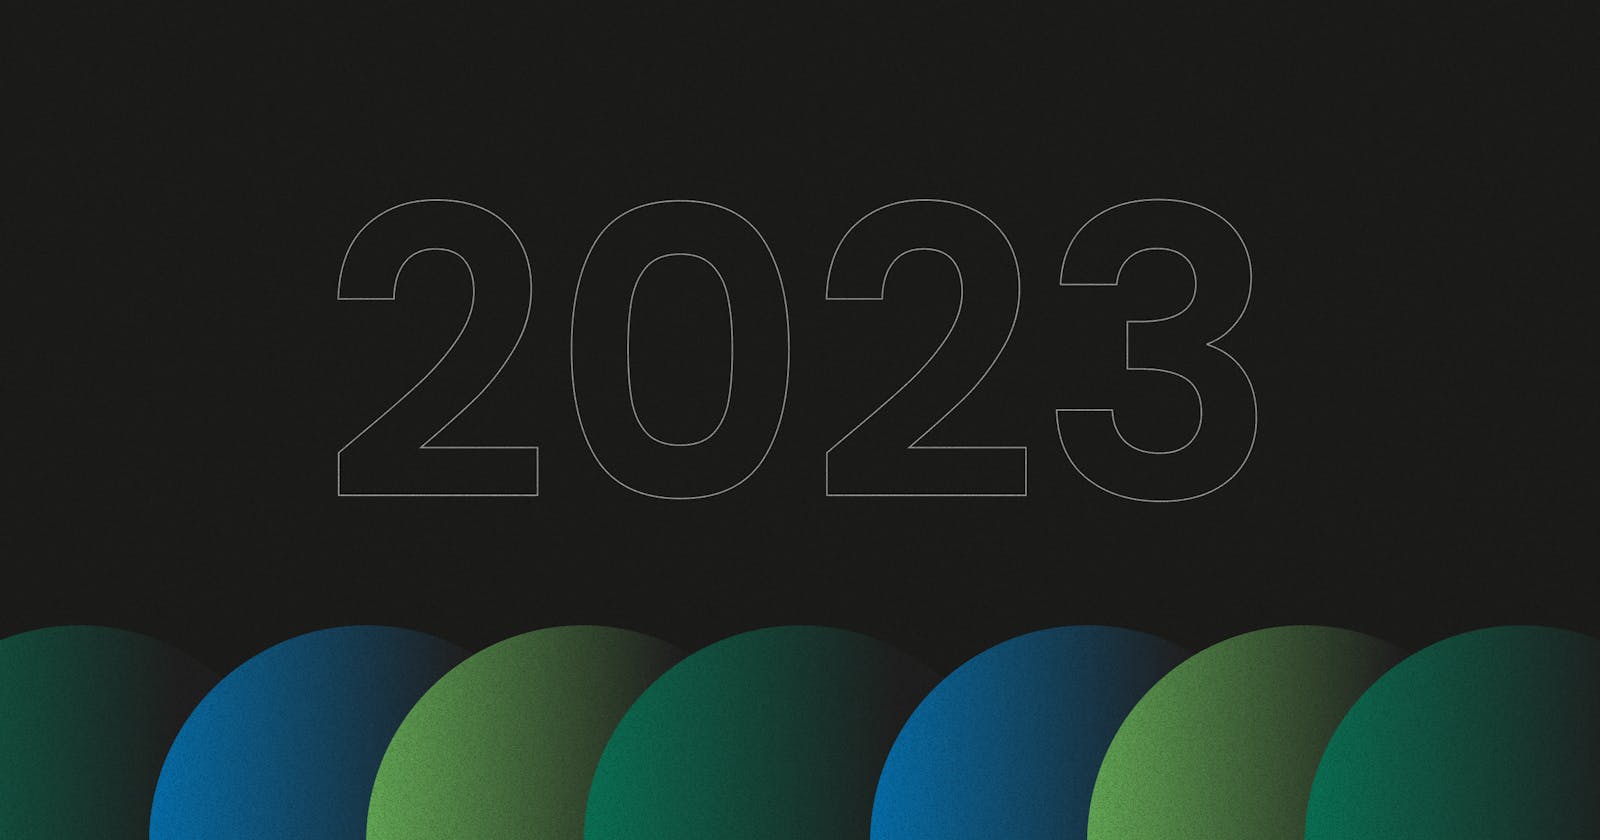 The most promising open source projects worth checking out in 2023